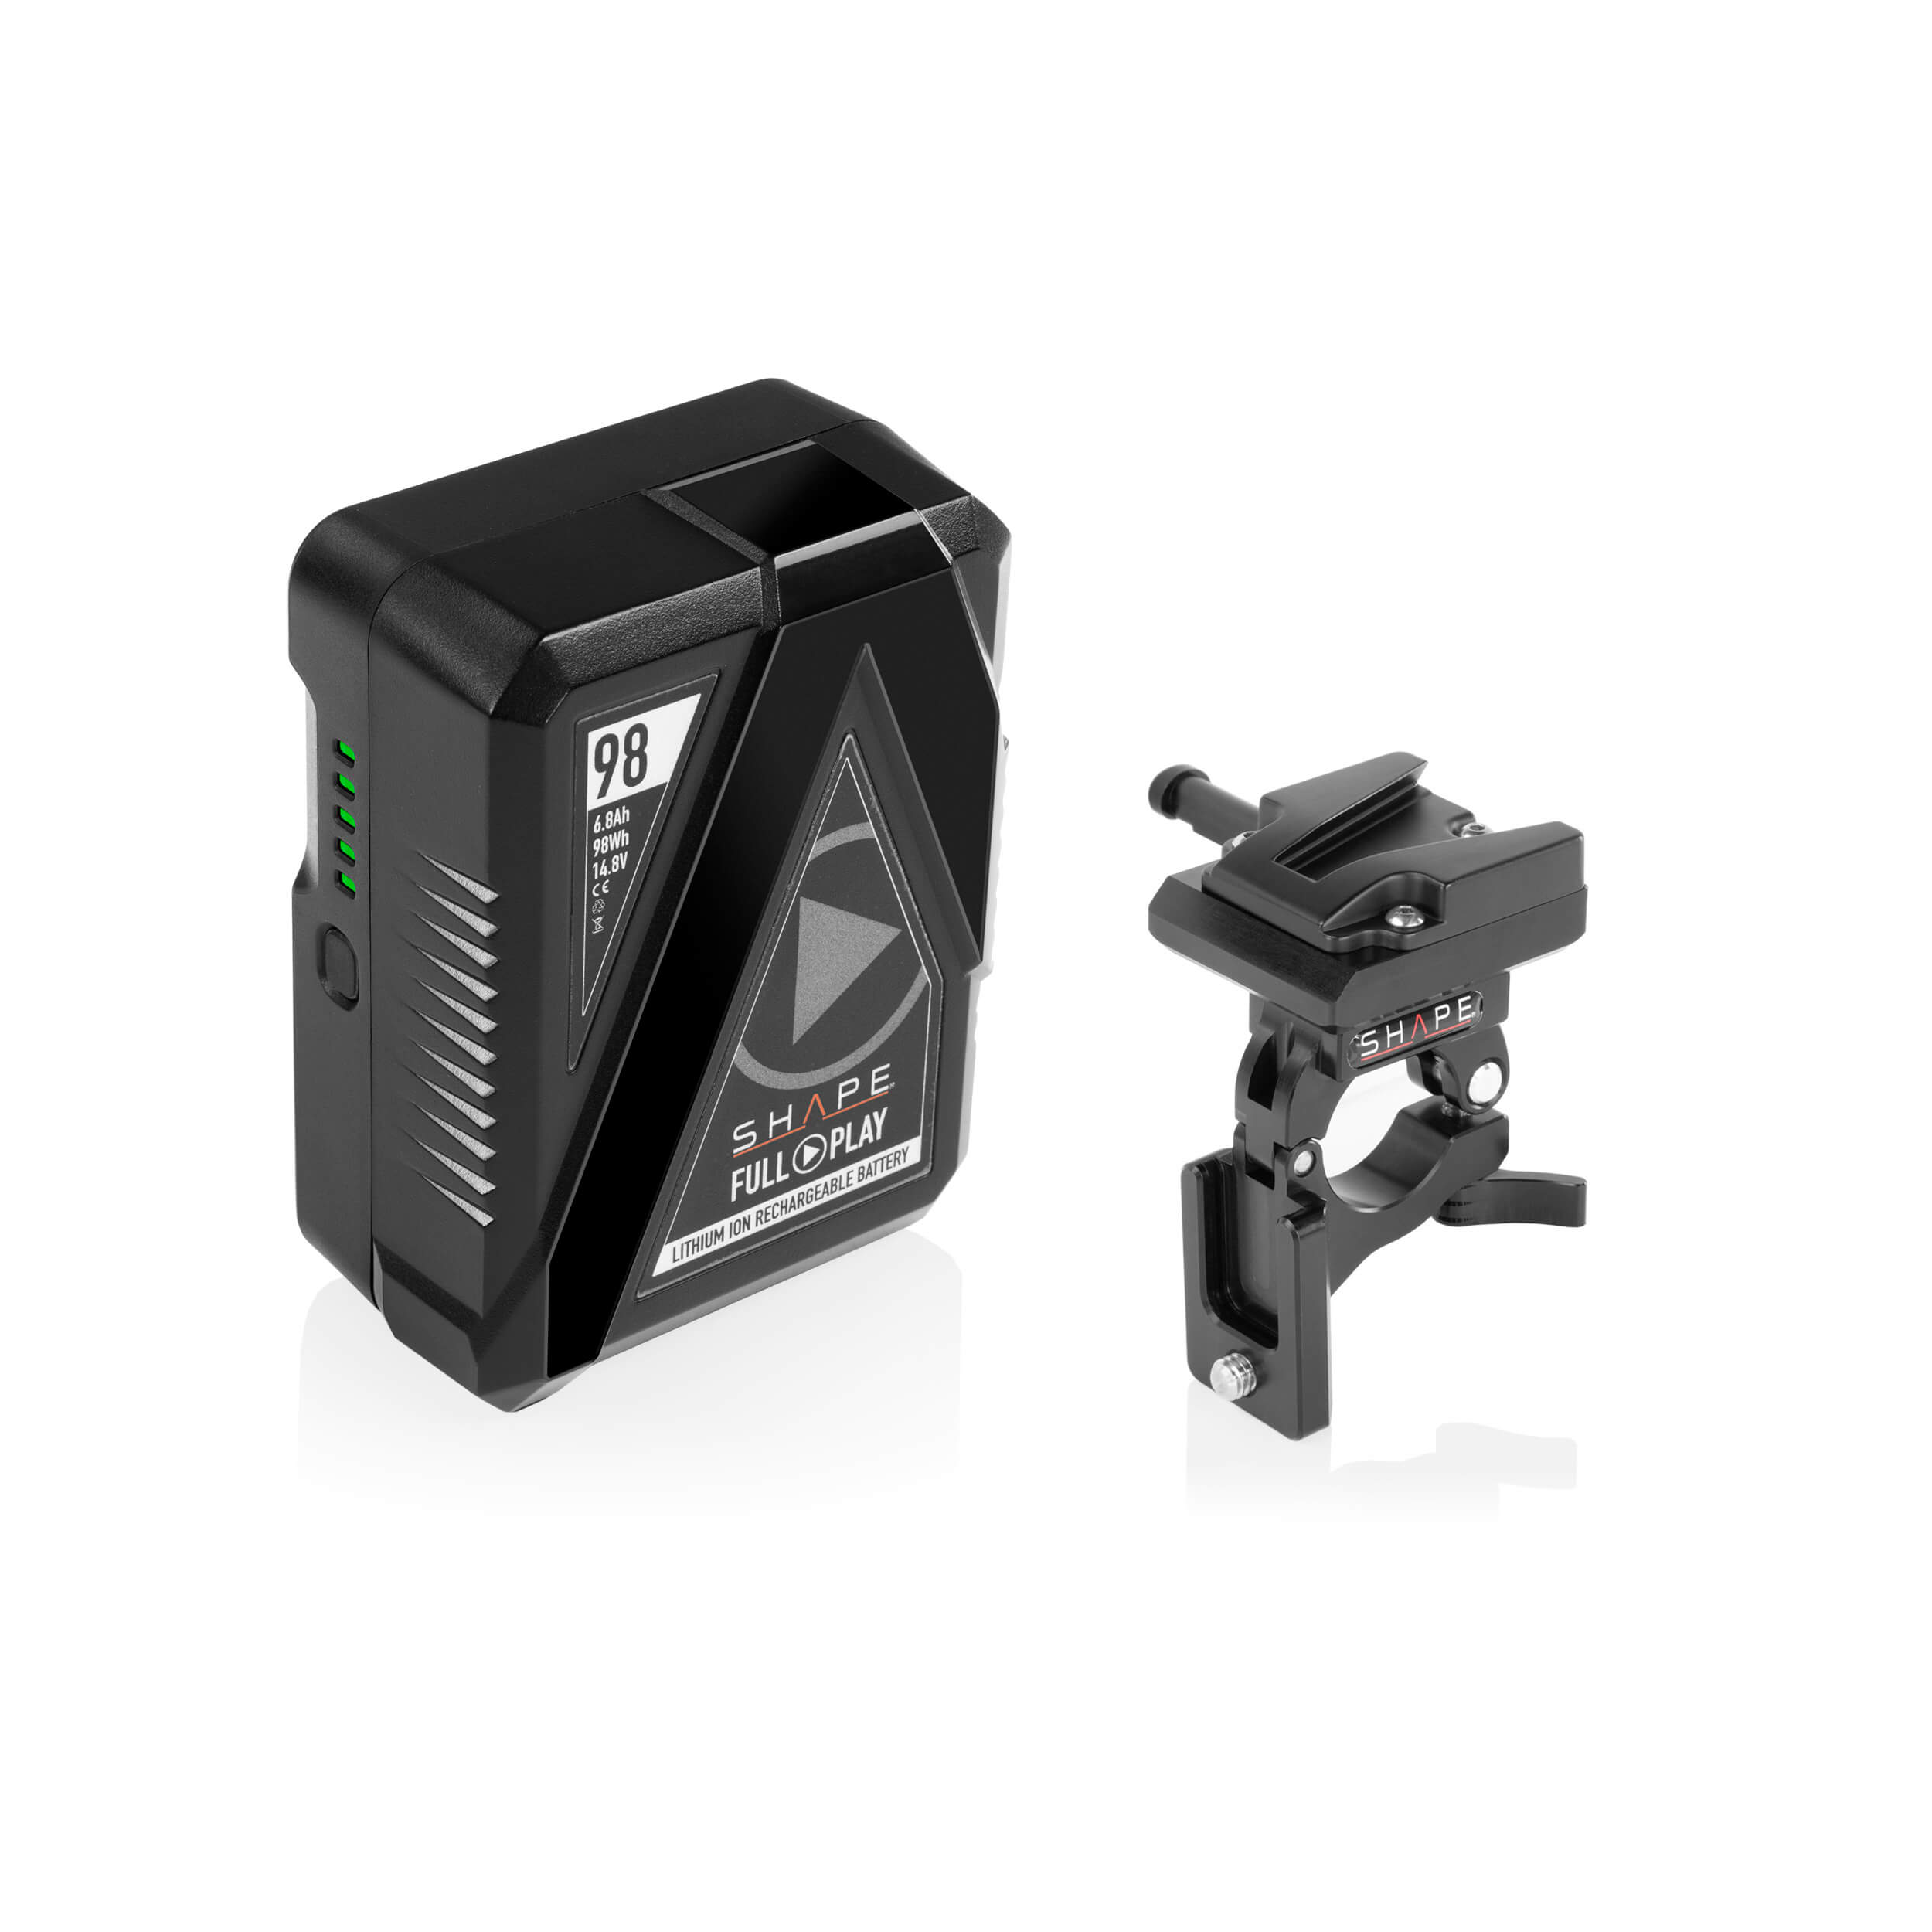 SHAPE Full Play 98Wh V-Mount Battery with Clamp for 25mm Gimbal Handlebar